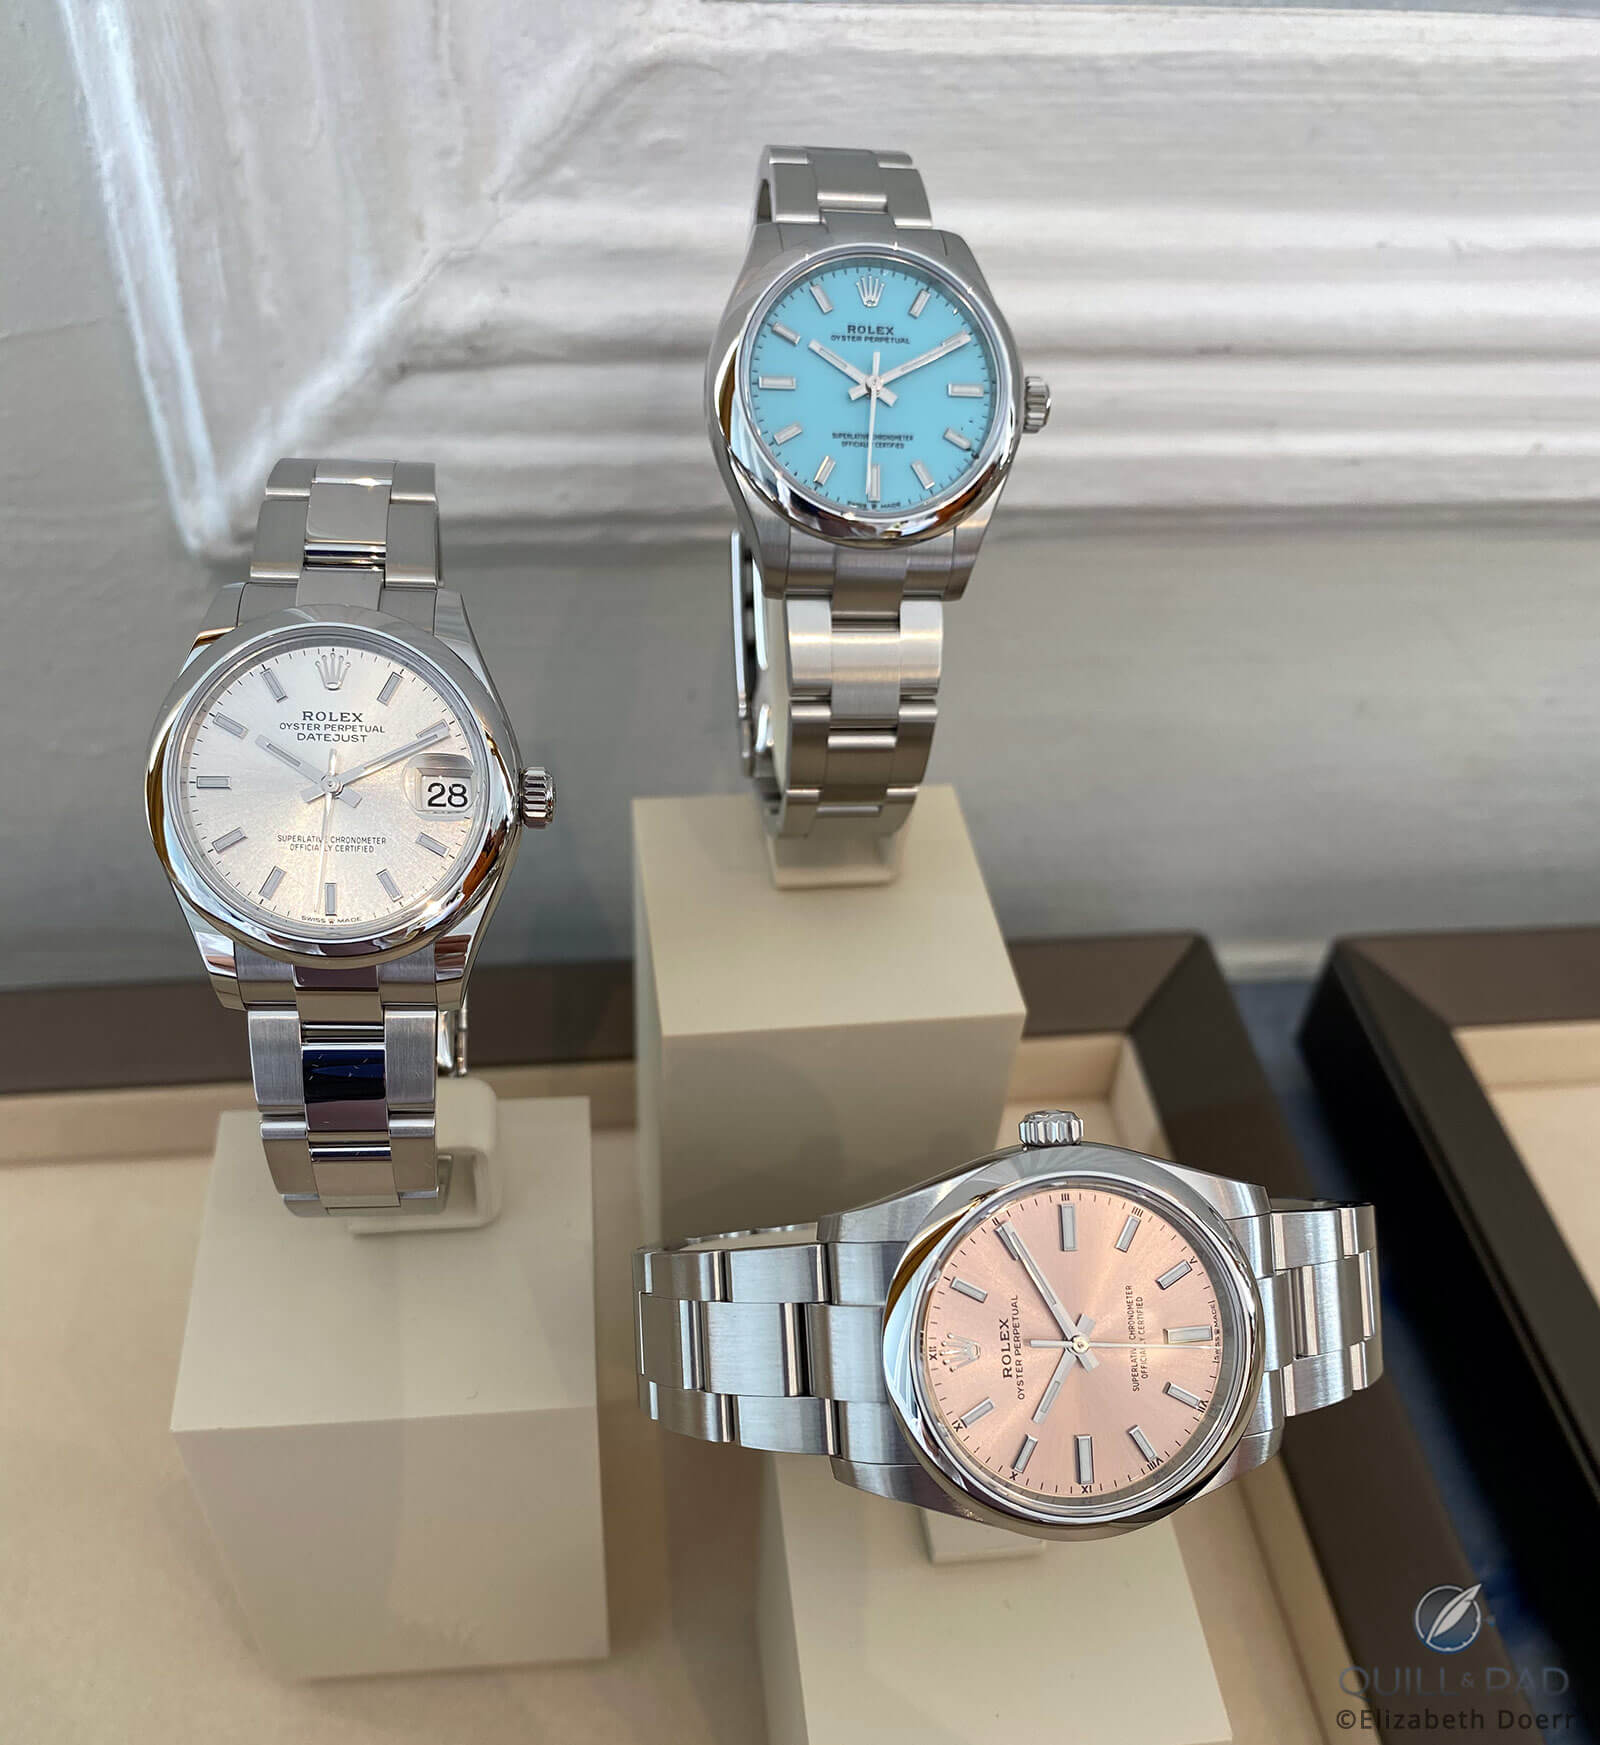 sneen variabel mental All 4 New Rolex 2020 Collection Updates Plus One Watch You Might Have  Missed - Quill & Pad